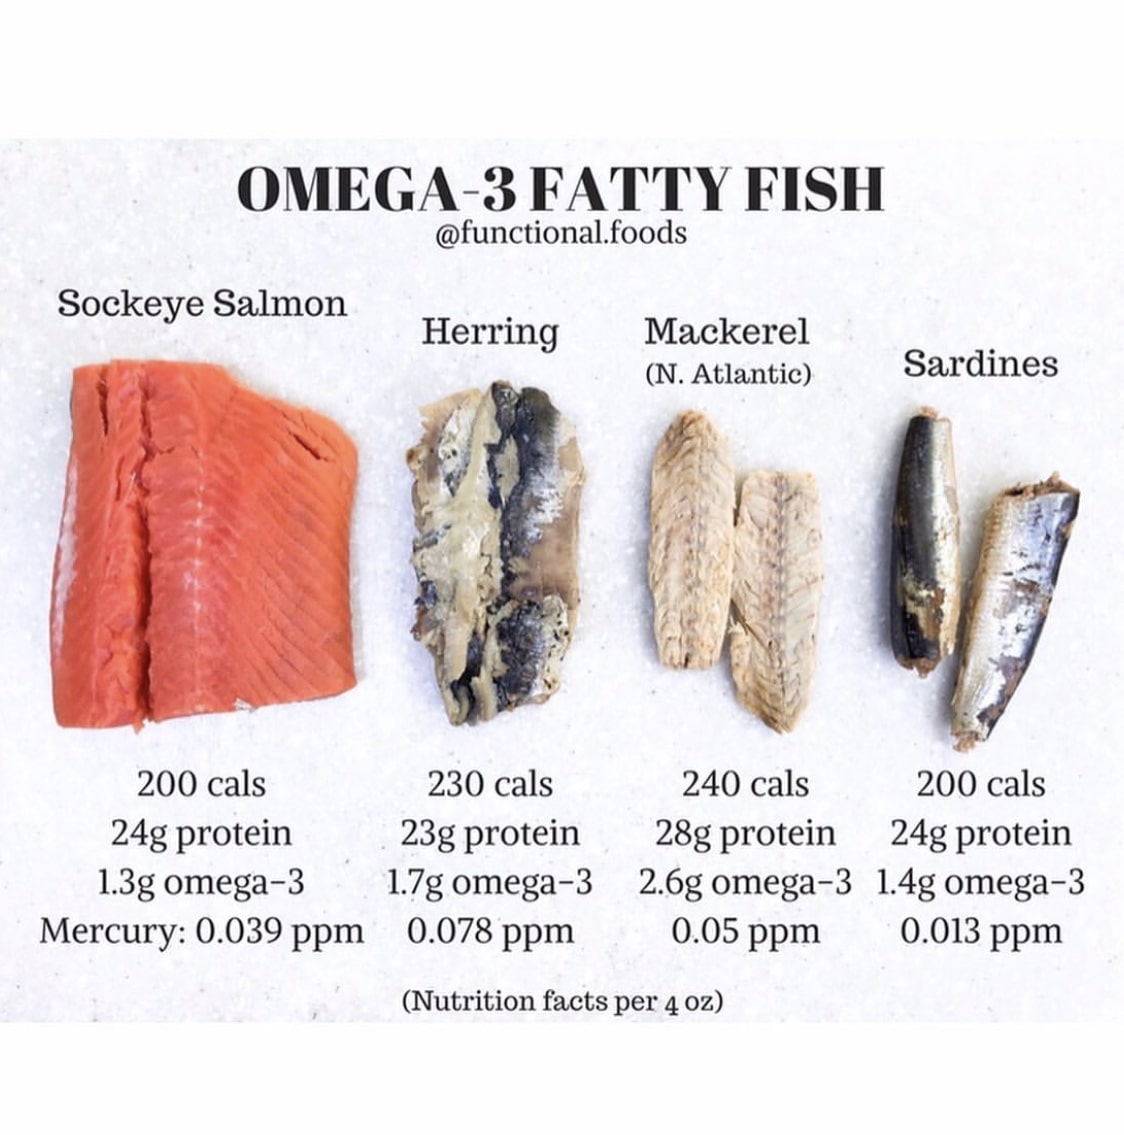 Fatty Fish with Omega-3s